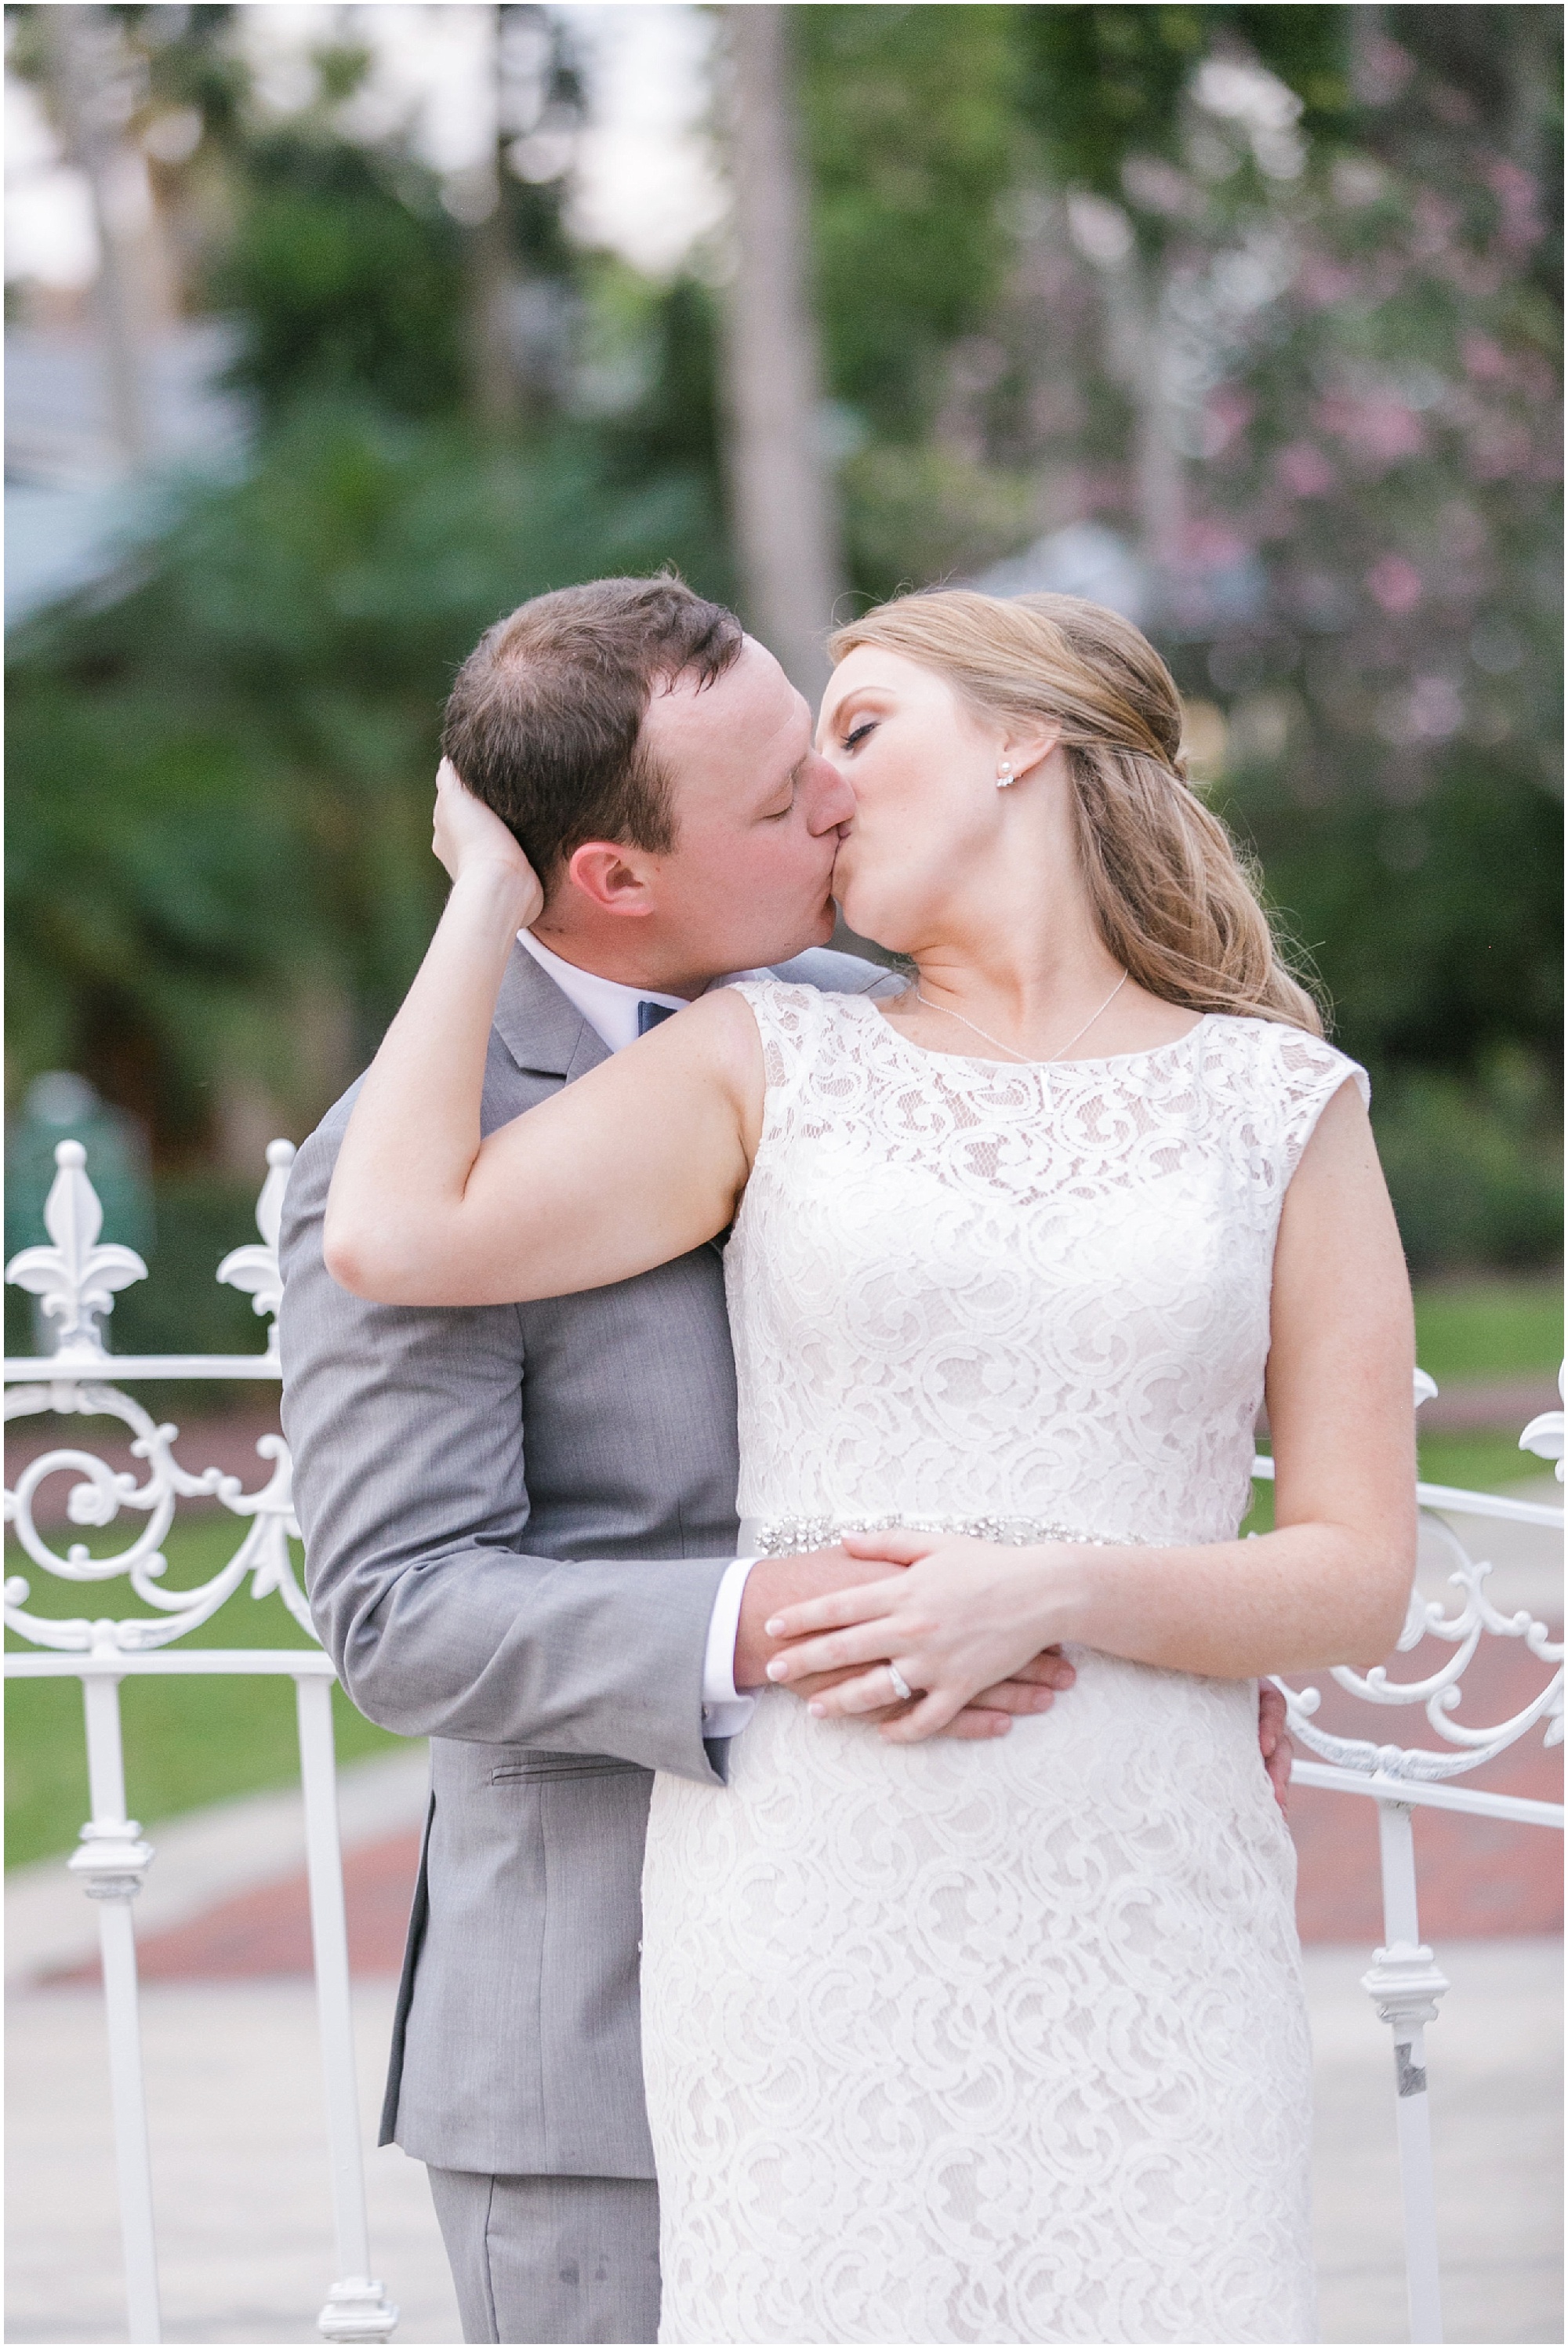 Newlywed couple share a kiss at The Estate on the Halifax wedding.